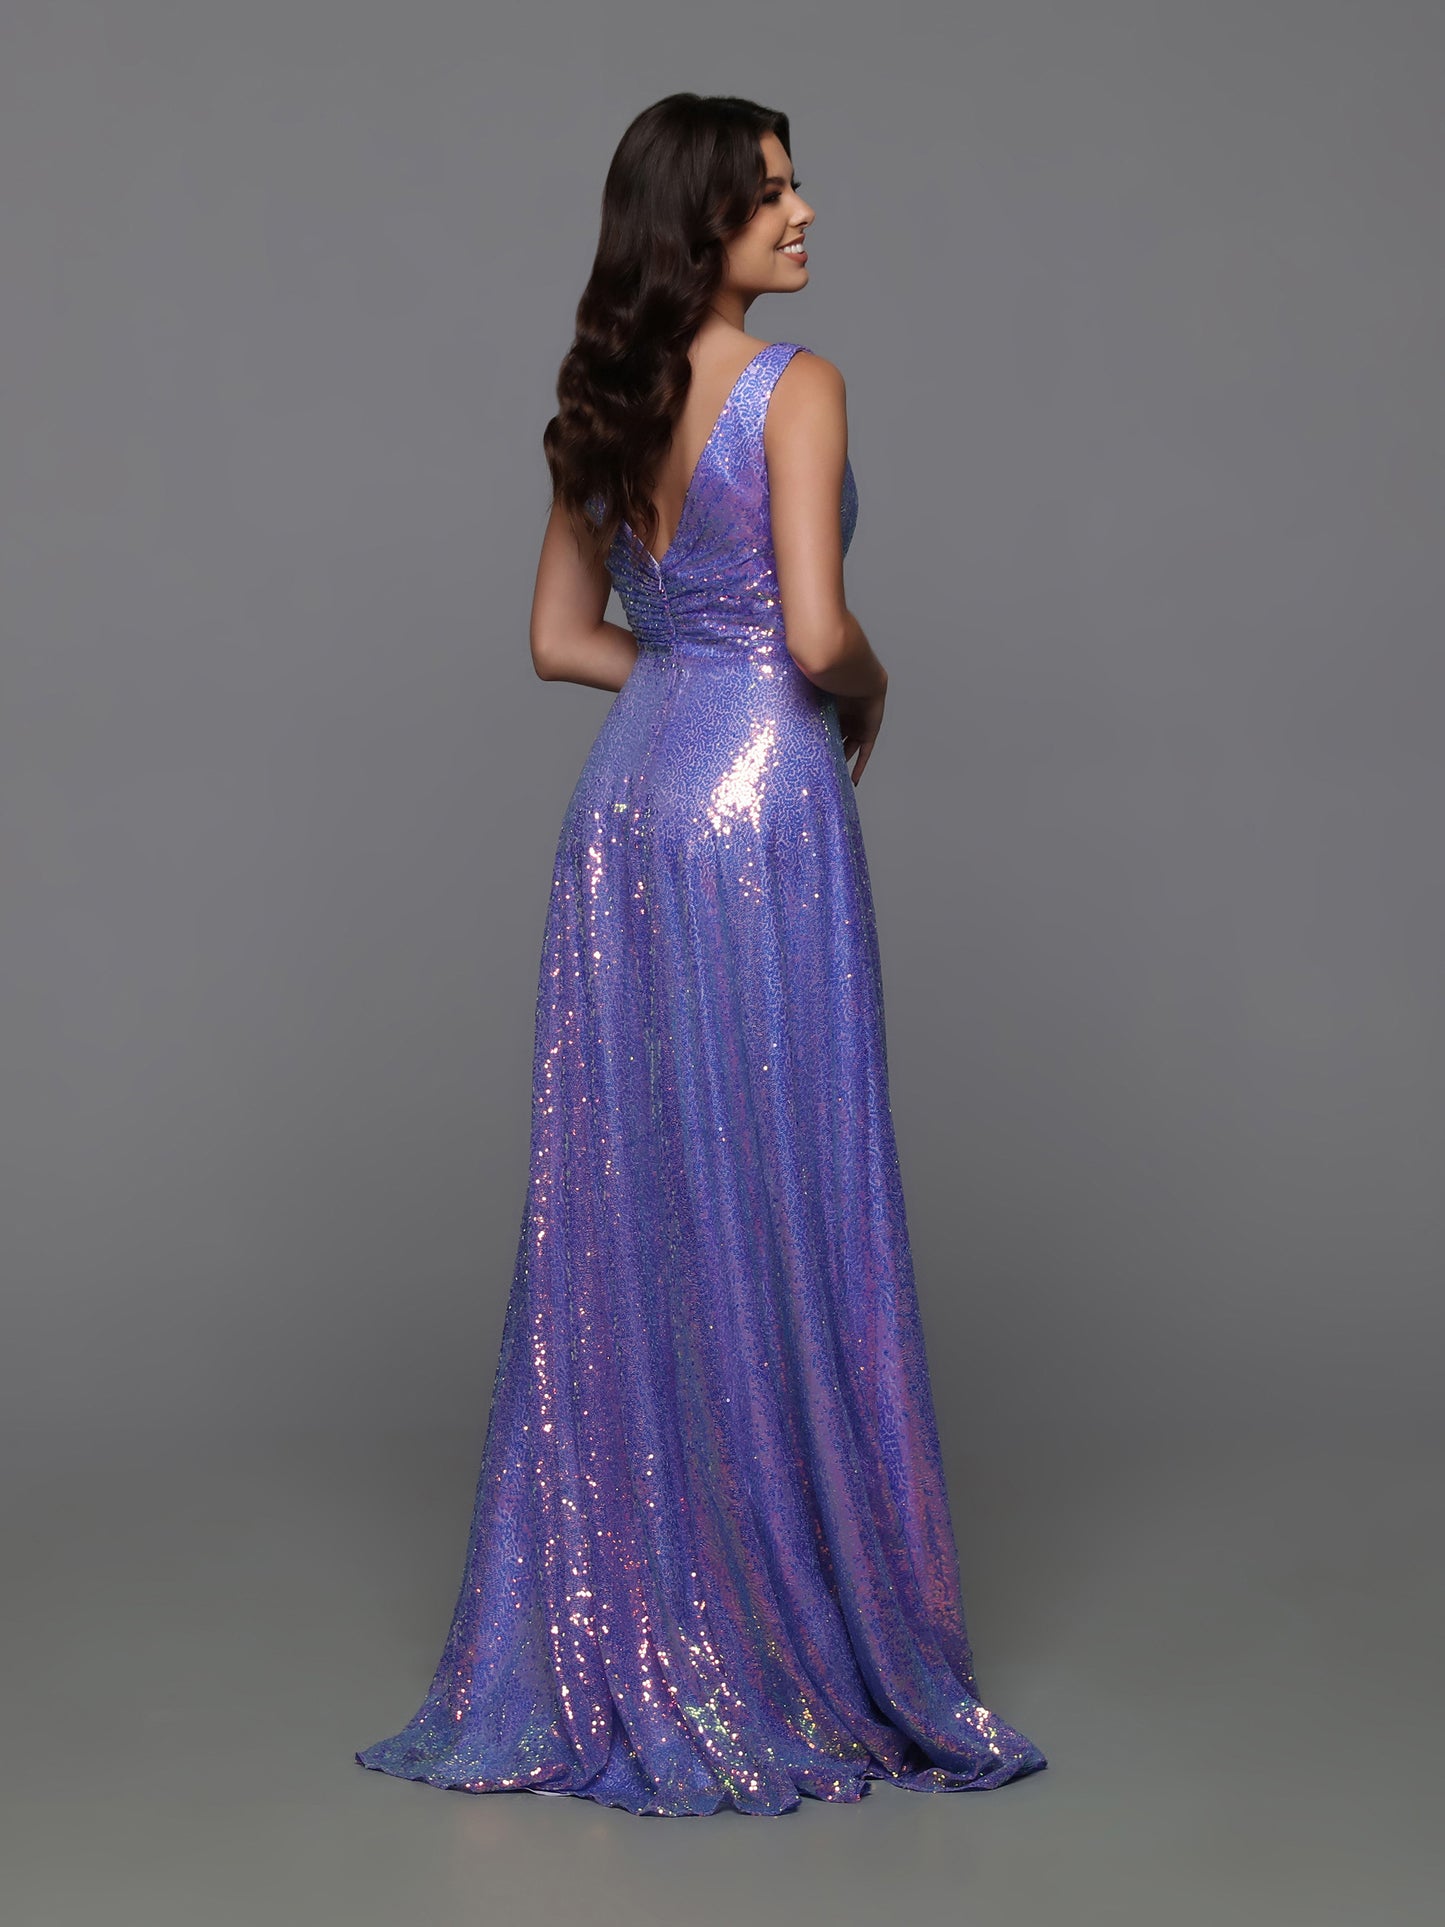 Sparkle Prom 72229 Long Sequin A Line Prom Dress Slit Ruched Skirt Formal Gown Iridescent  Sizes: 0-20  Colors: Cobalt, Gold/Black, Lilac